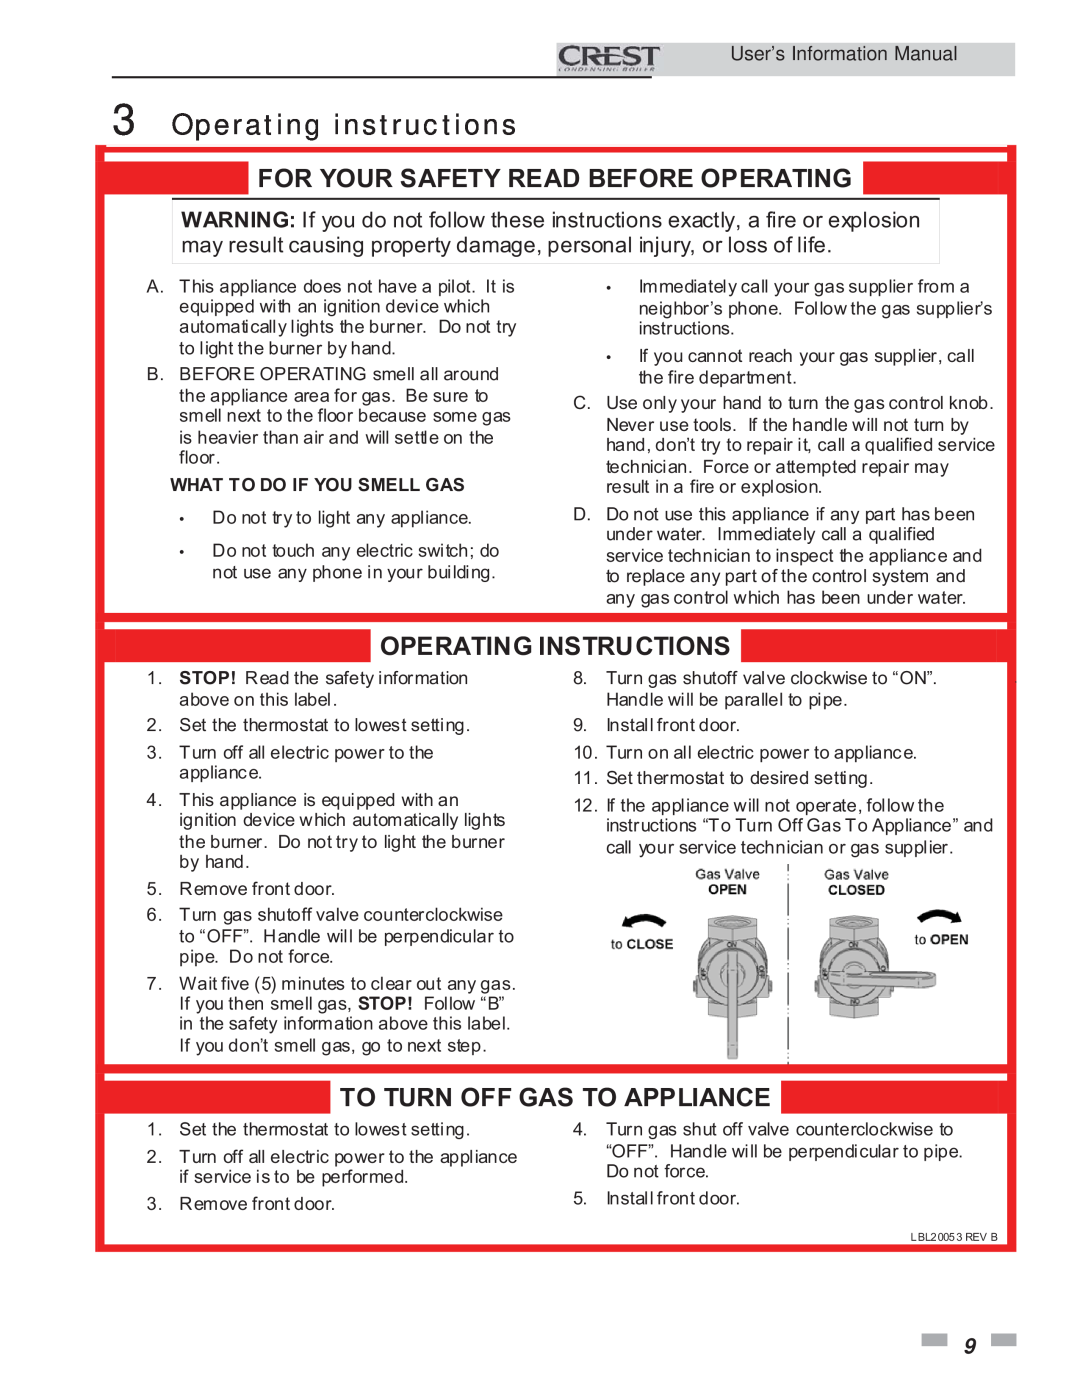 Lochinvar 1.5 manual Operating instructions, For Your Safety Read Before Operating, Operating Instructions 